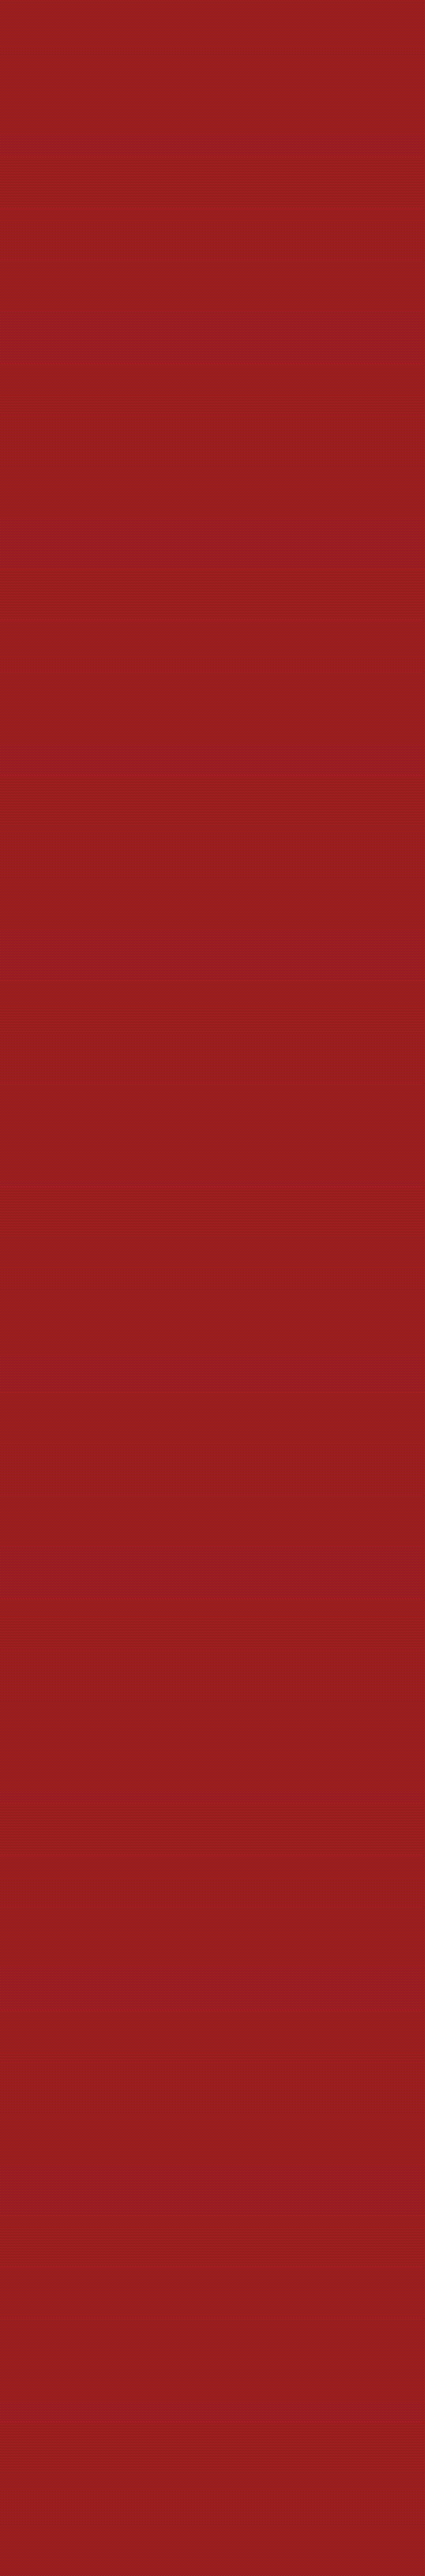 A red and white photo of a red and white background - Fracassados